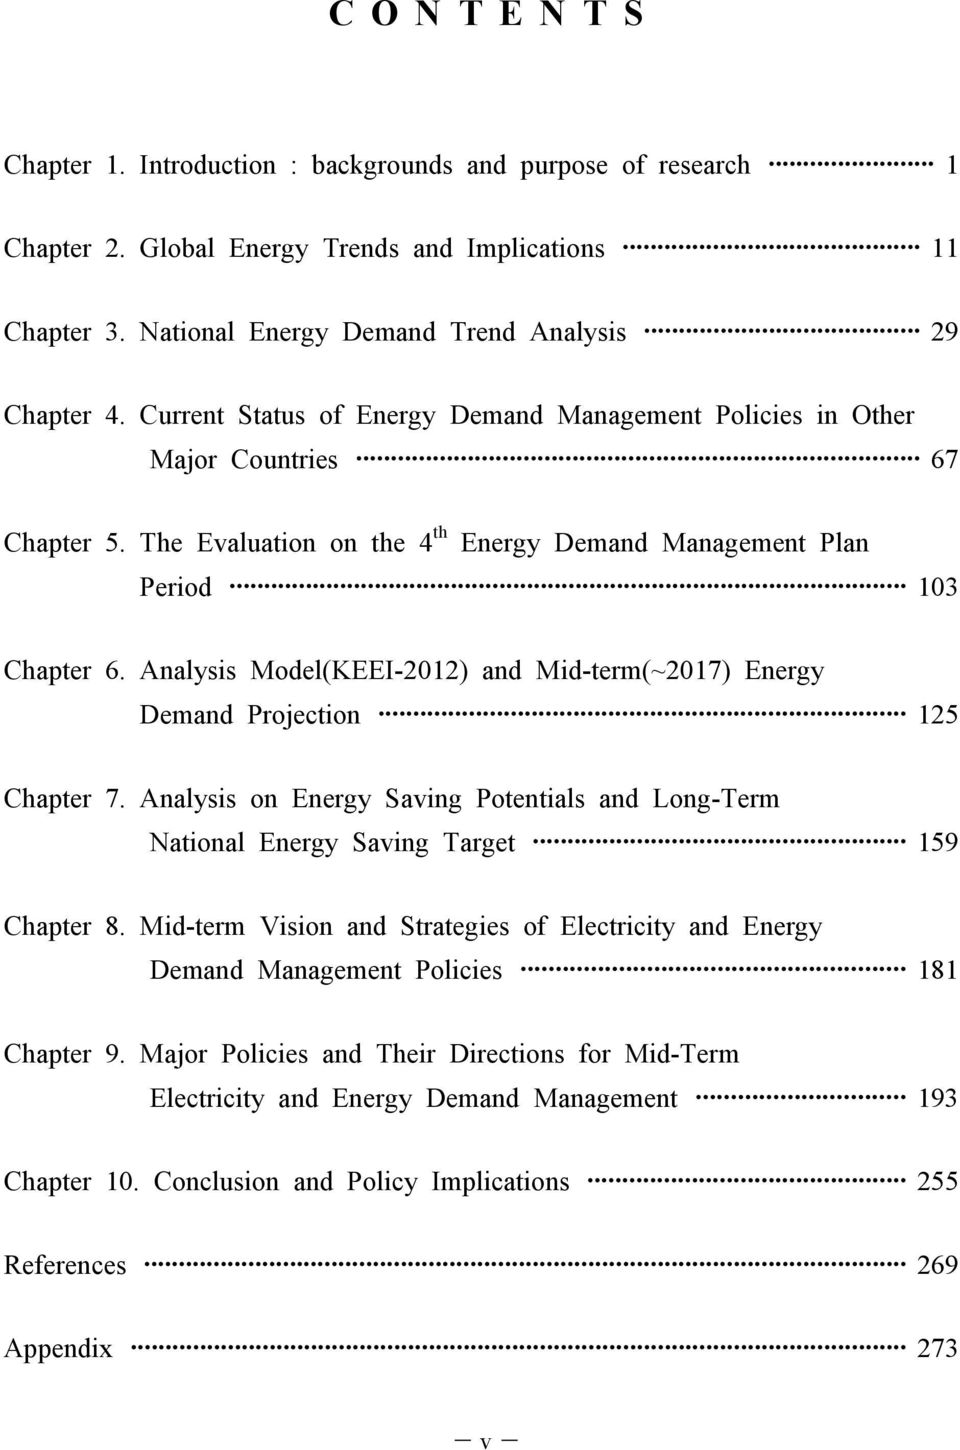 Analysis Model(KEEI-2012) and Mid-term(~2017) Energy Demand Projection 125 Chapter 7. Analysis on Energy Saving Potentials and Long-Term National Energy Saving Target 159 Chapter 8.